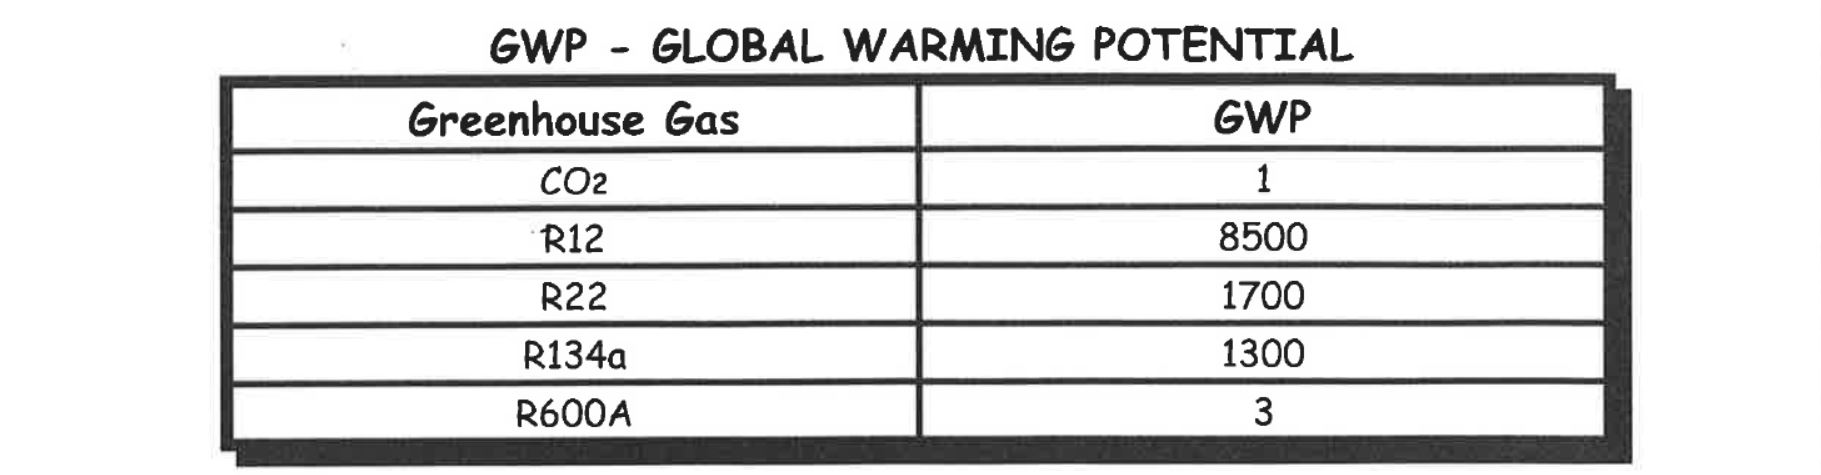 global warming potential